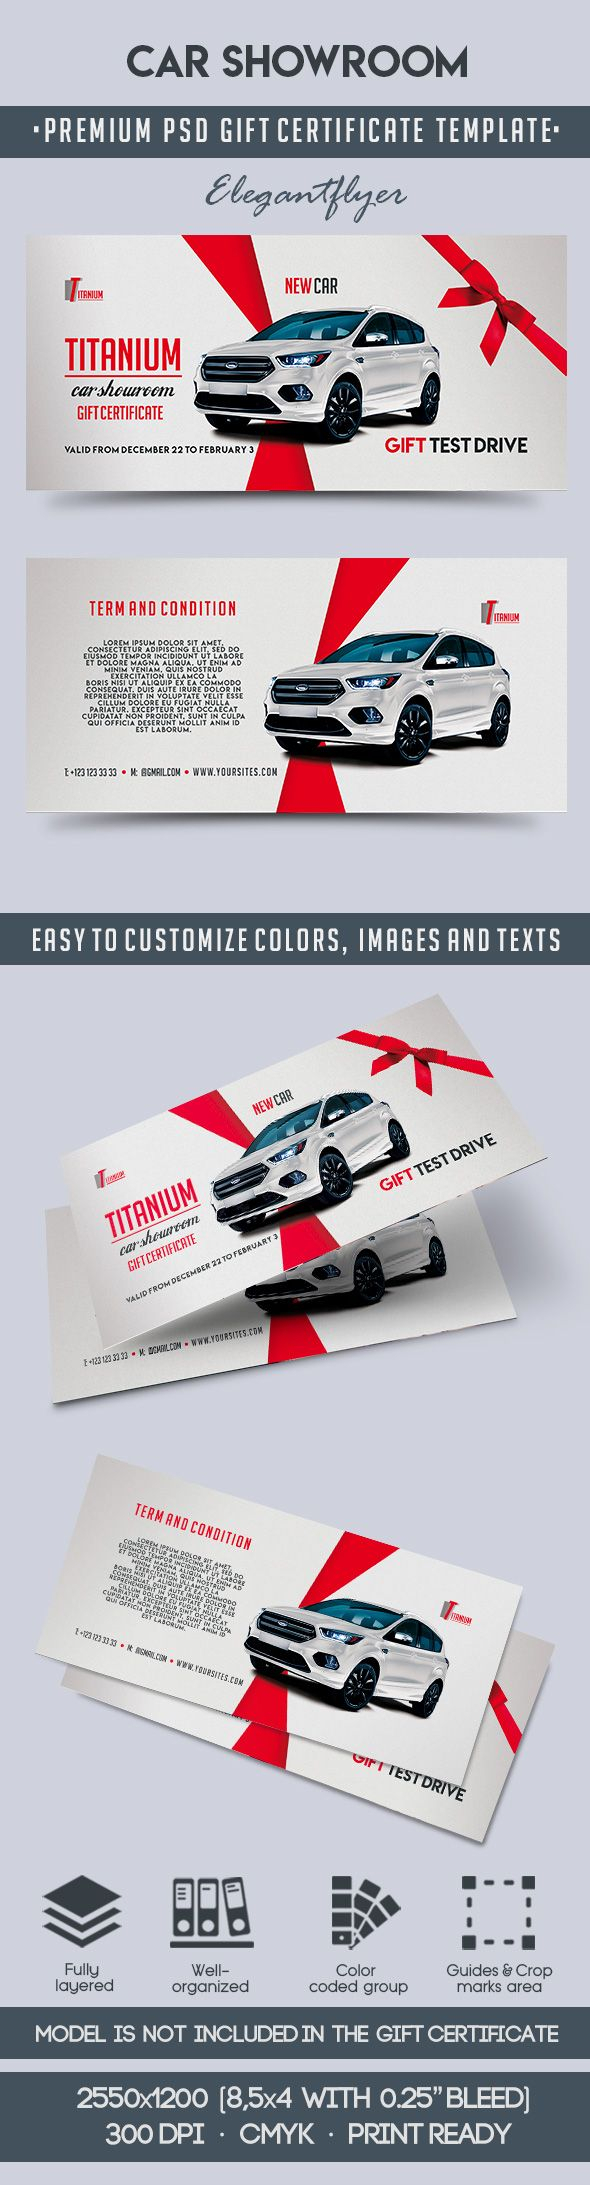 Car Showroom – Premium Gift Certificate Psd Template Pertaining To Automotive Gift Certificate Template